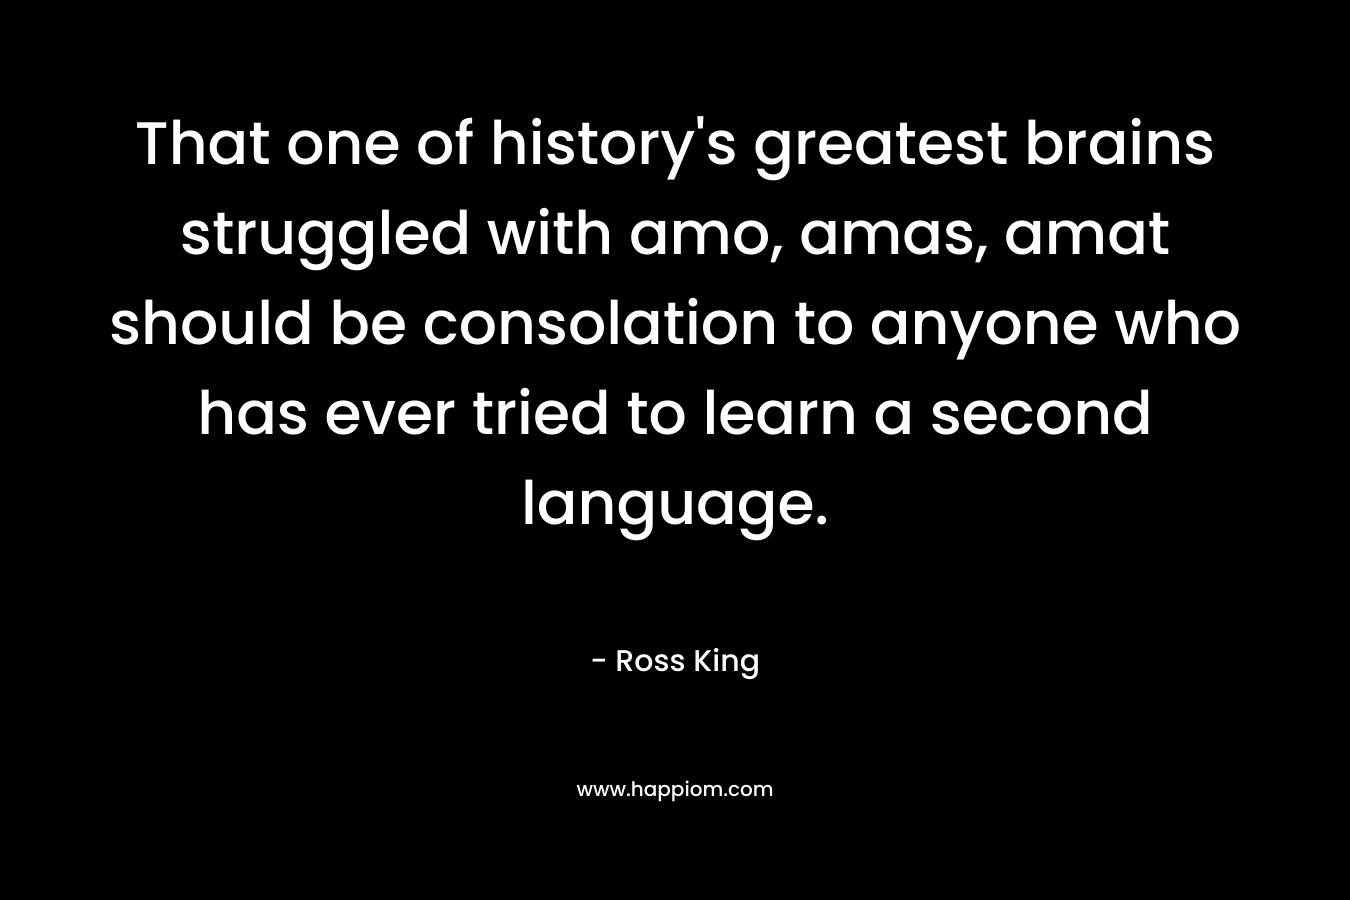 That one of history’s greatest brains struggled with amo, amas, amat should be consolation to anyone who has ever tried to learn a second language. – Ross King